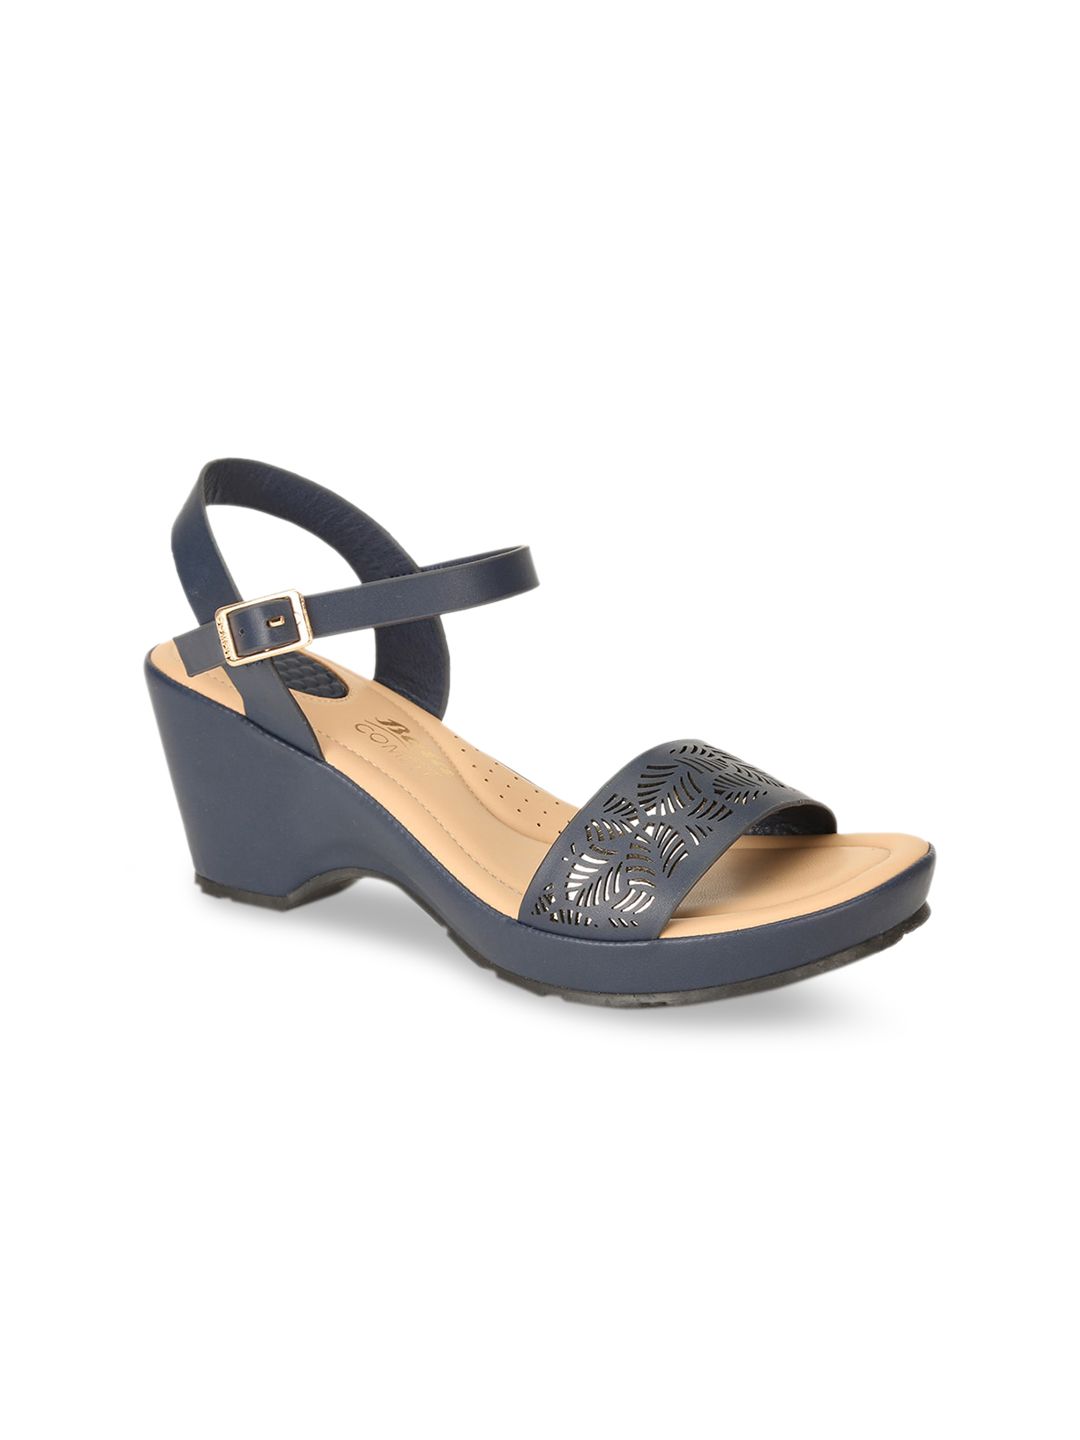 Bata Blue Textured PU Block Sandals with Laser Cuts Price in India